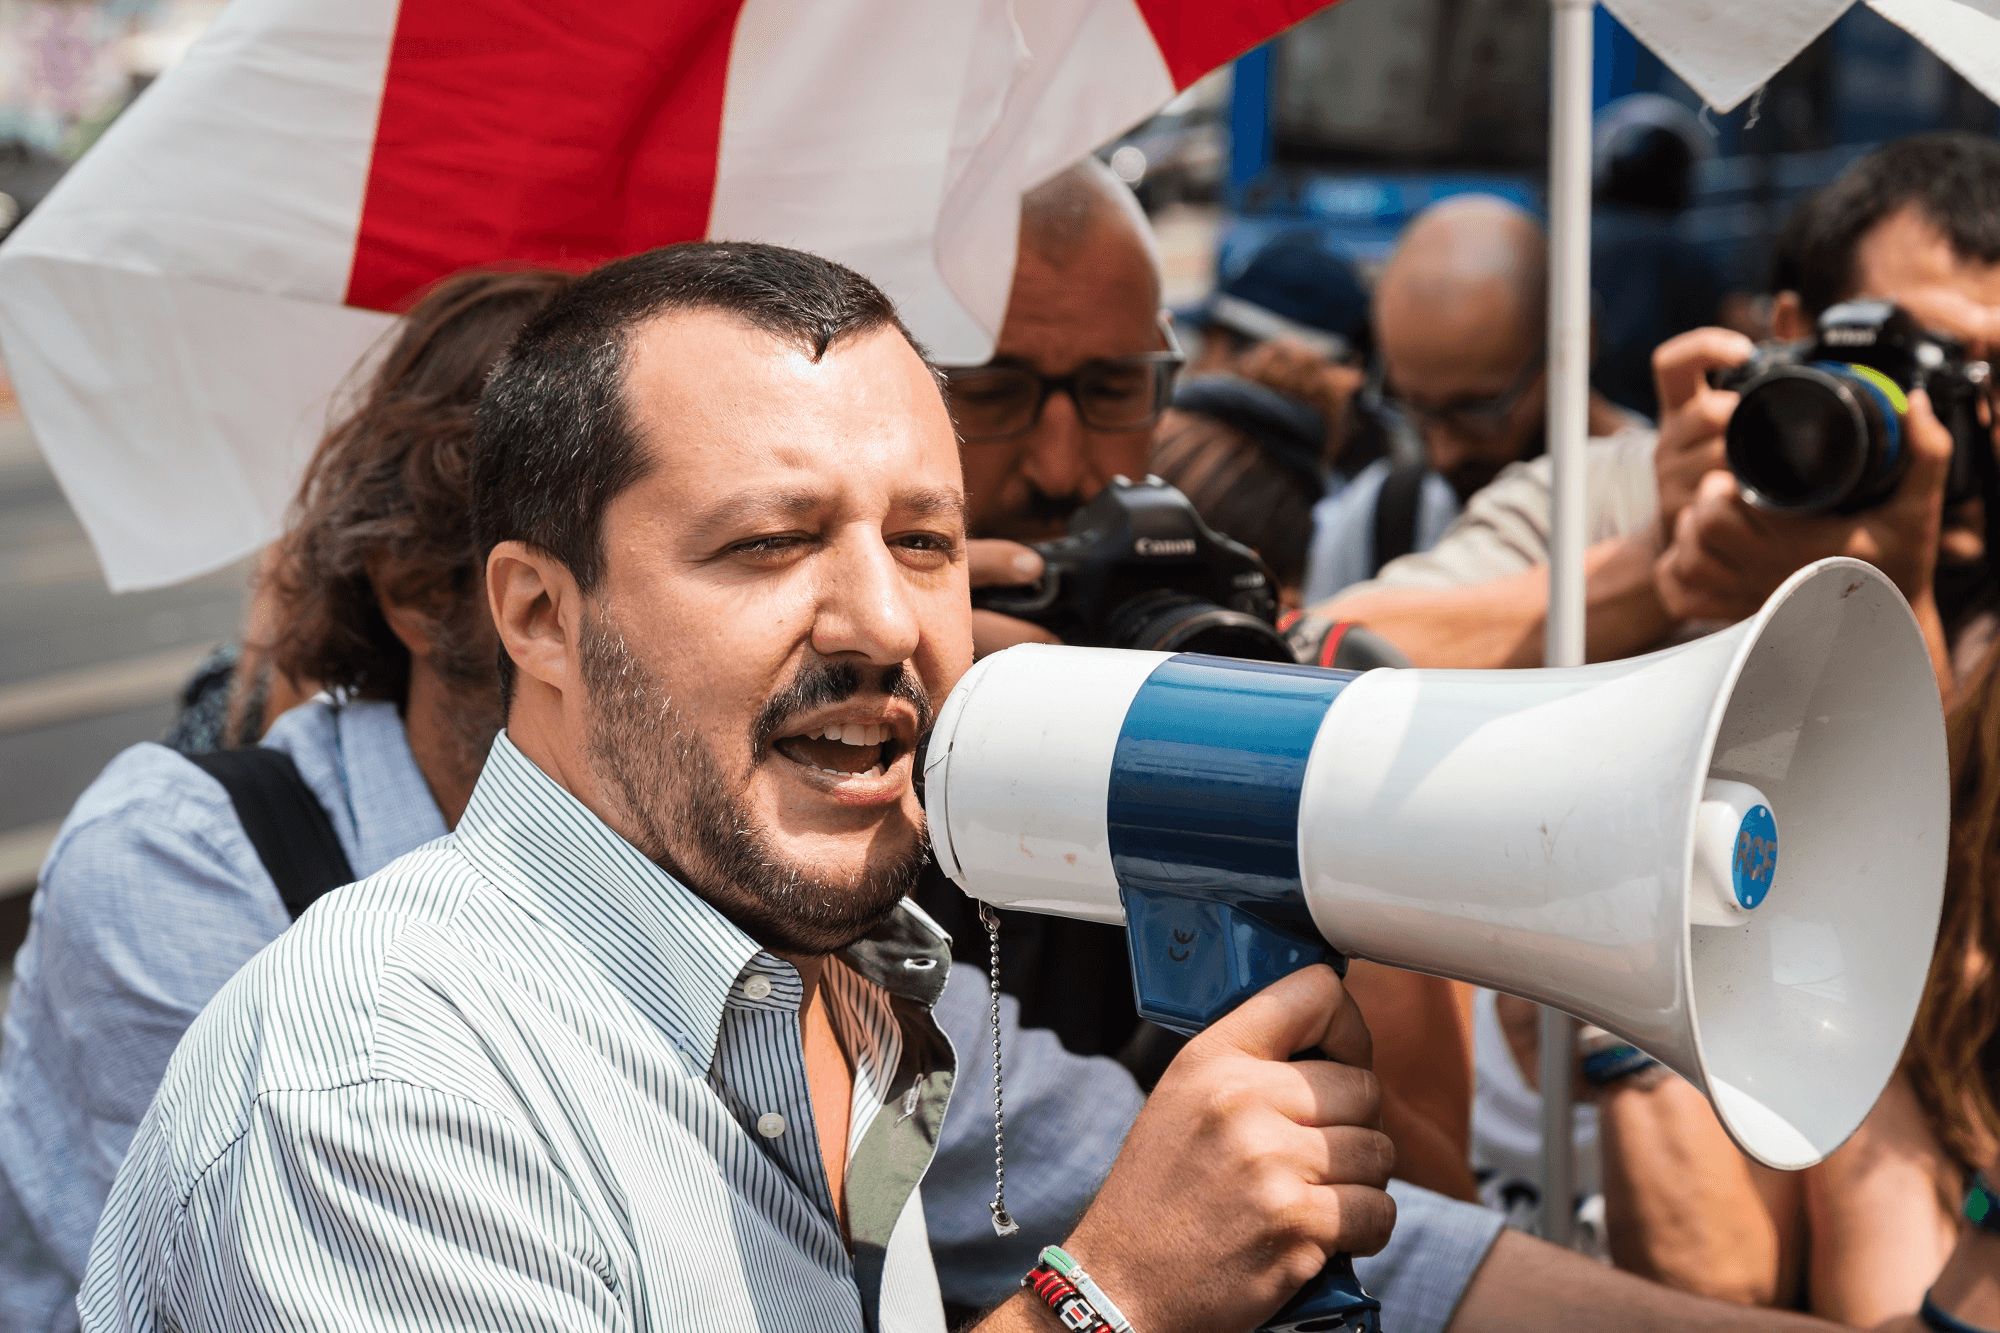 Image How Populism Is Crippling Italy’s International Standing